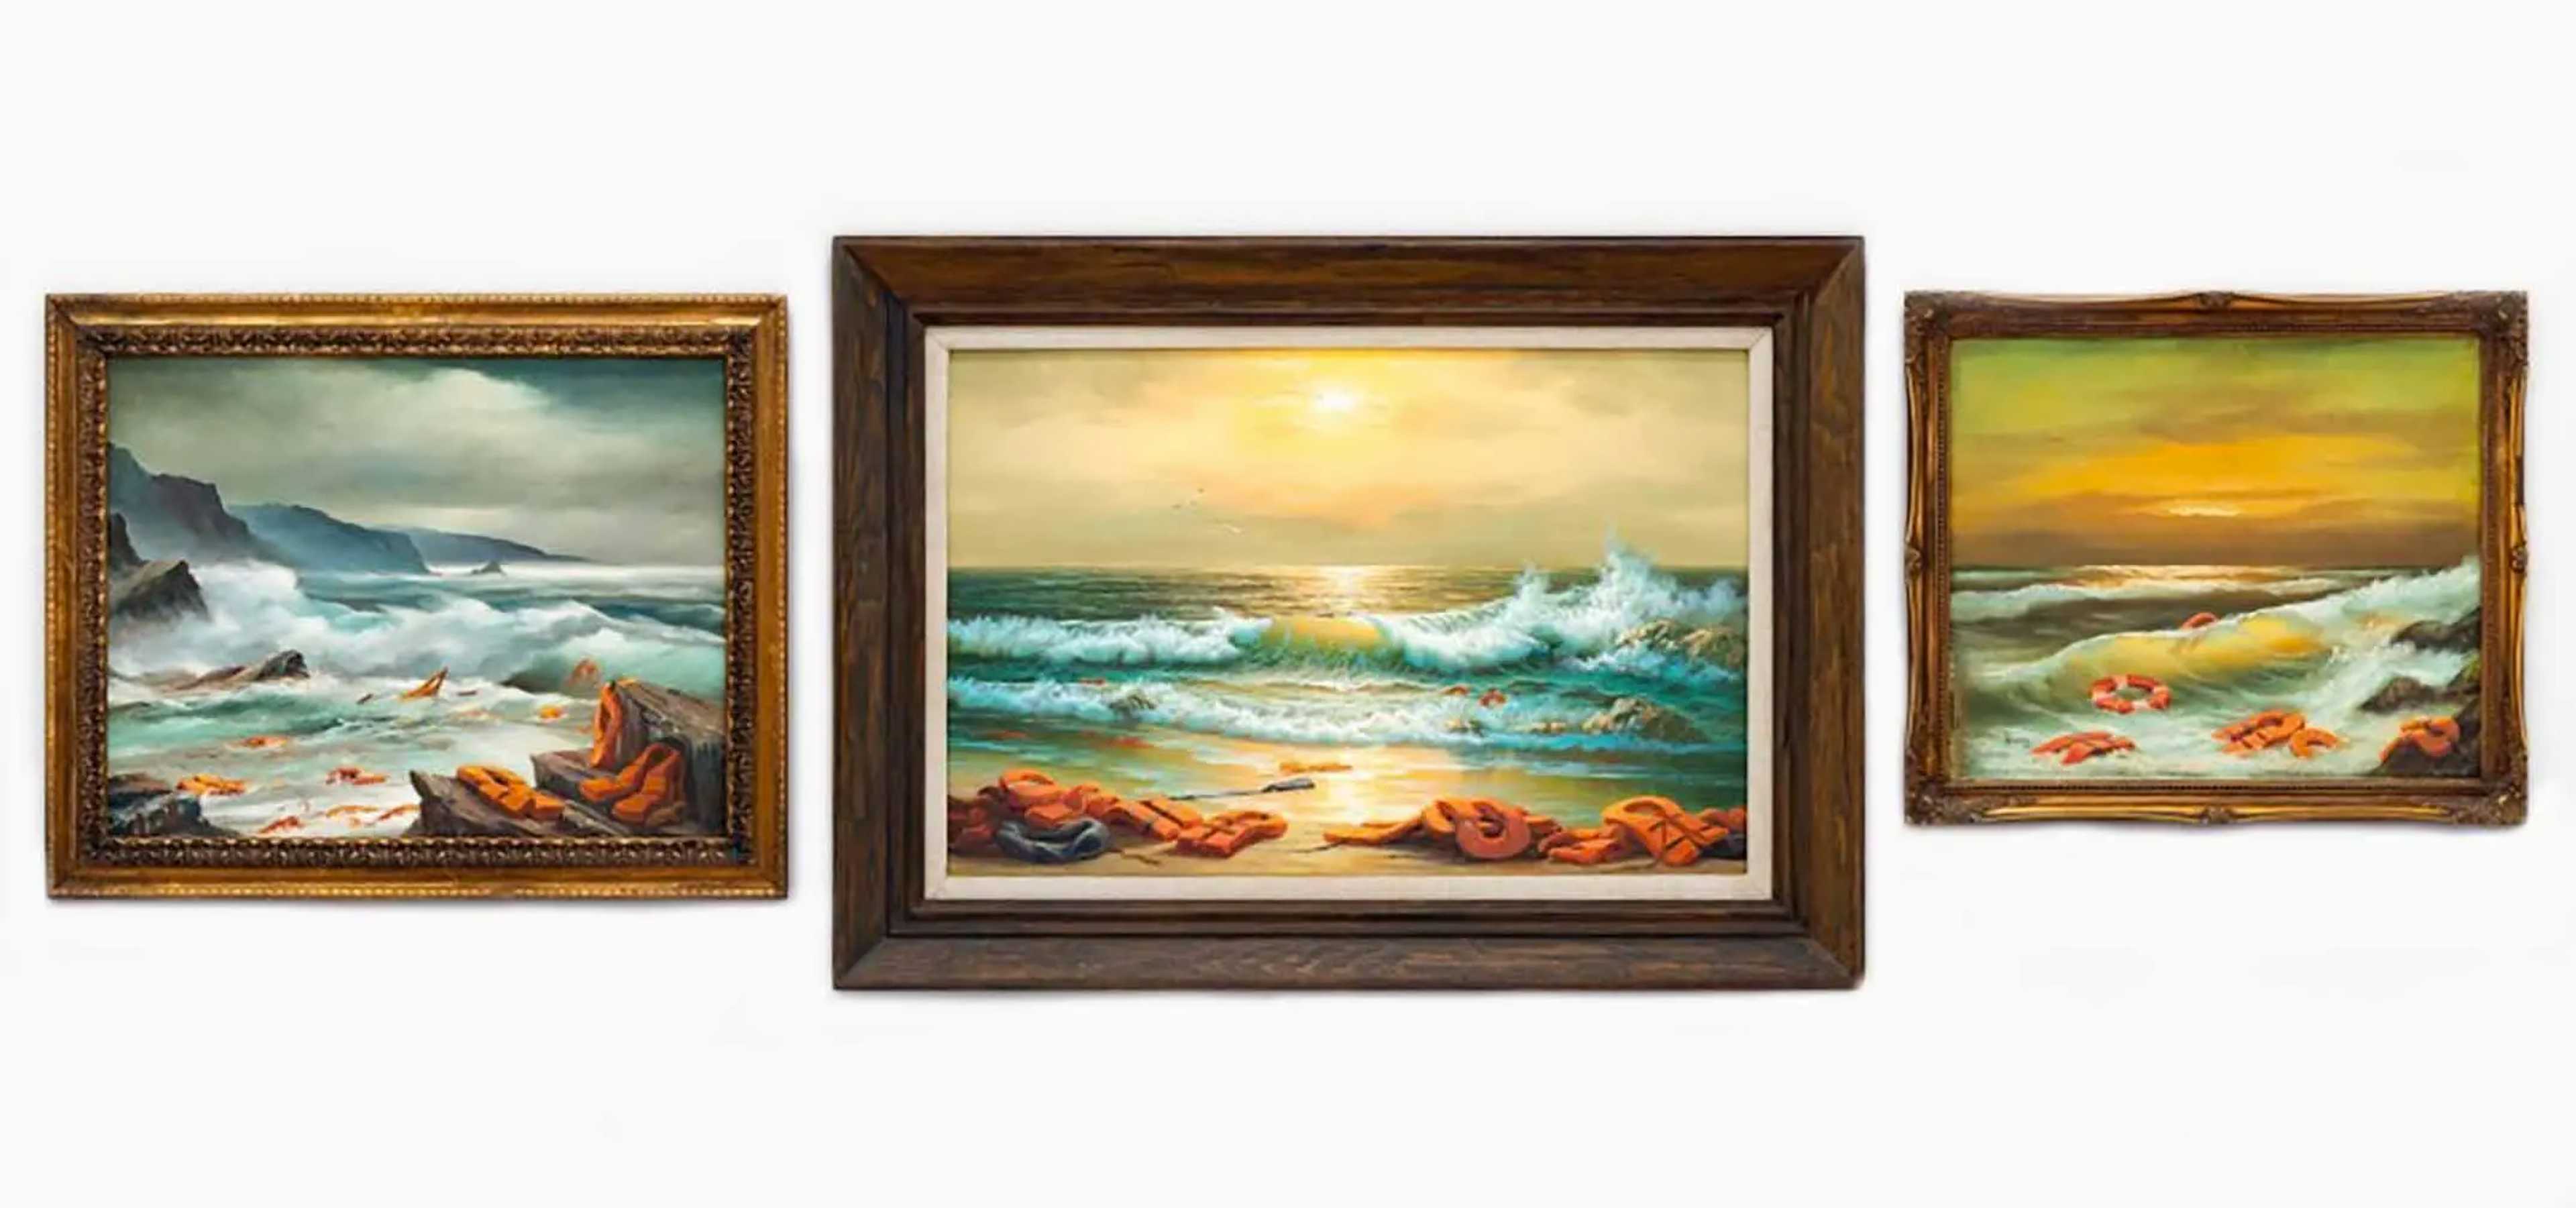 Mediterranean Sea View is a triptych consisting of three found oil paintings that were reworked by Banksy in 2017. Filled with translucent breaking waves, the turbulent seascapes feature in three of the canvases, recalling the Romantic era imagery. Banksy interrupts the original scenery by imposing hand-painted life jackets and buoys on the canvases.